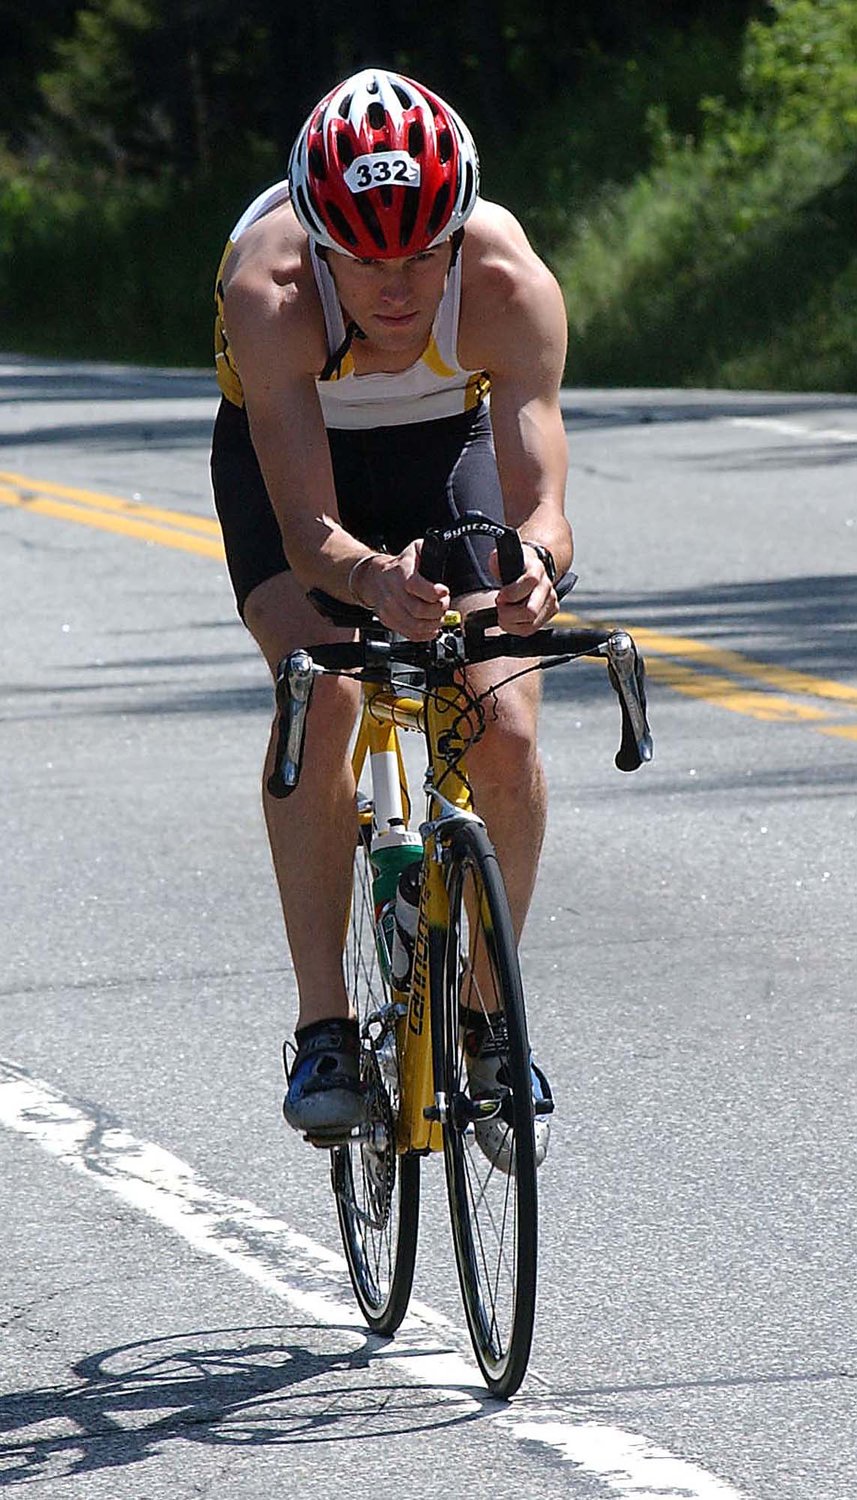 This year will be the 23rd Ironman triathlon in this Lake Placid. A new contract between organizers and the Lake Placid village board allows Ironman to return for two more years — through 2024. In this file photo, Robert Kenney, of Camillus, N.Y., does a little light training in the Wilmington Notch, Saturday, July 23, 2005, for the Ford Ironman USA Lake Placid Triathlon in Lake Placid, N.Y.